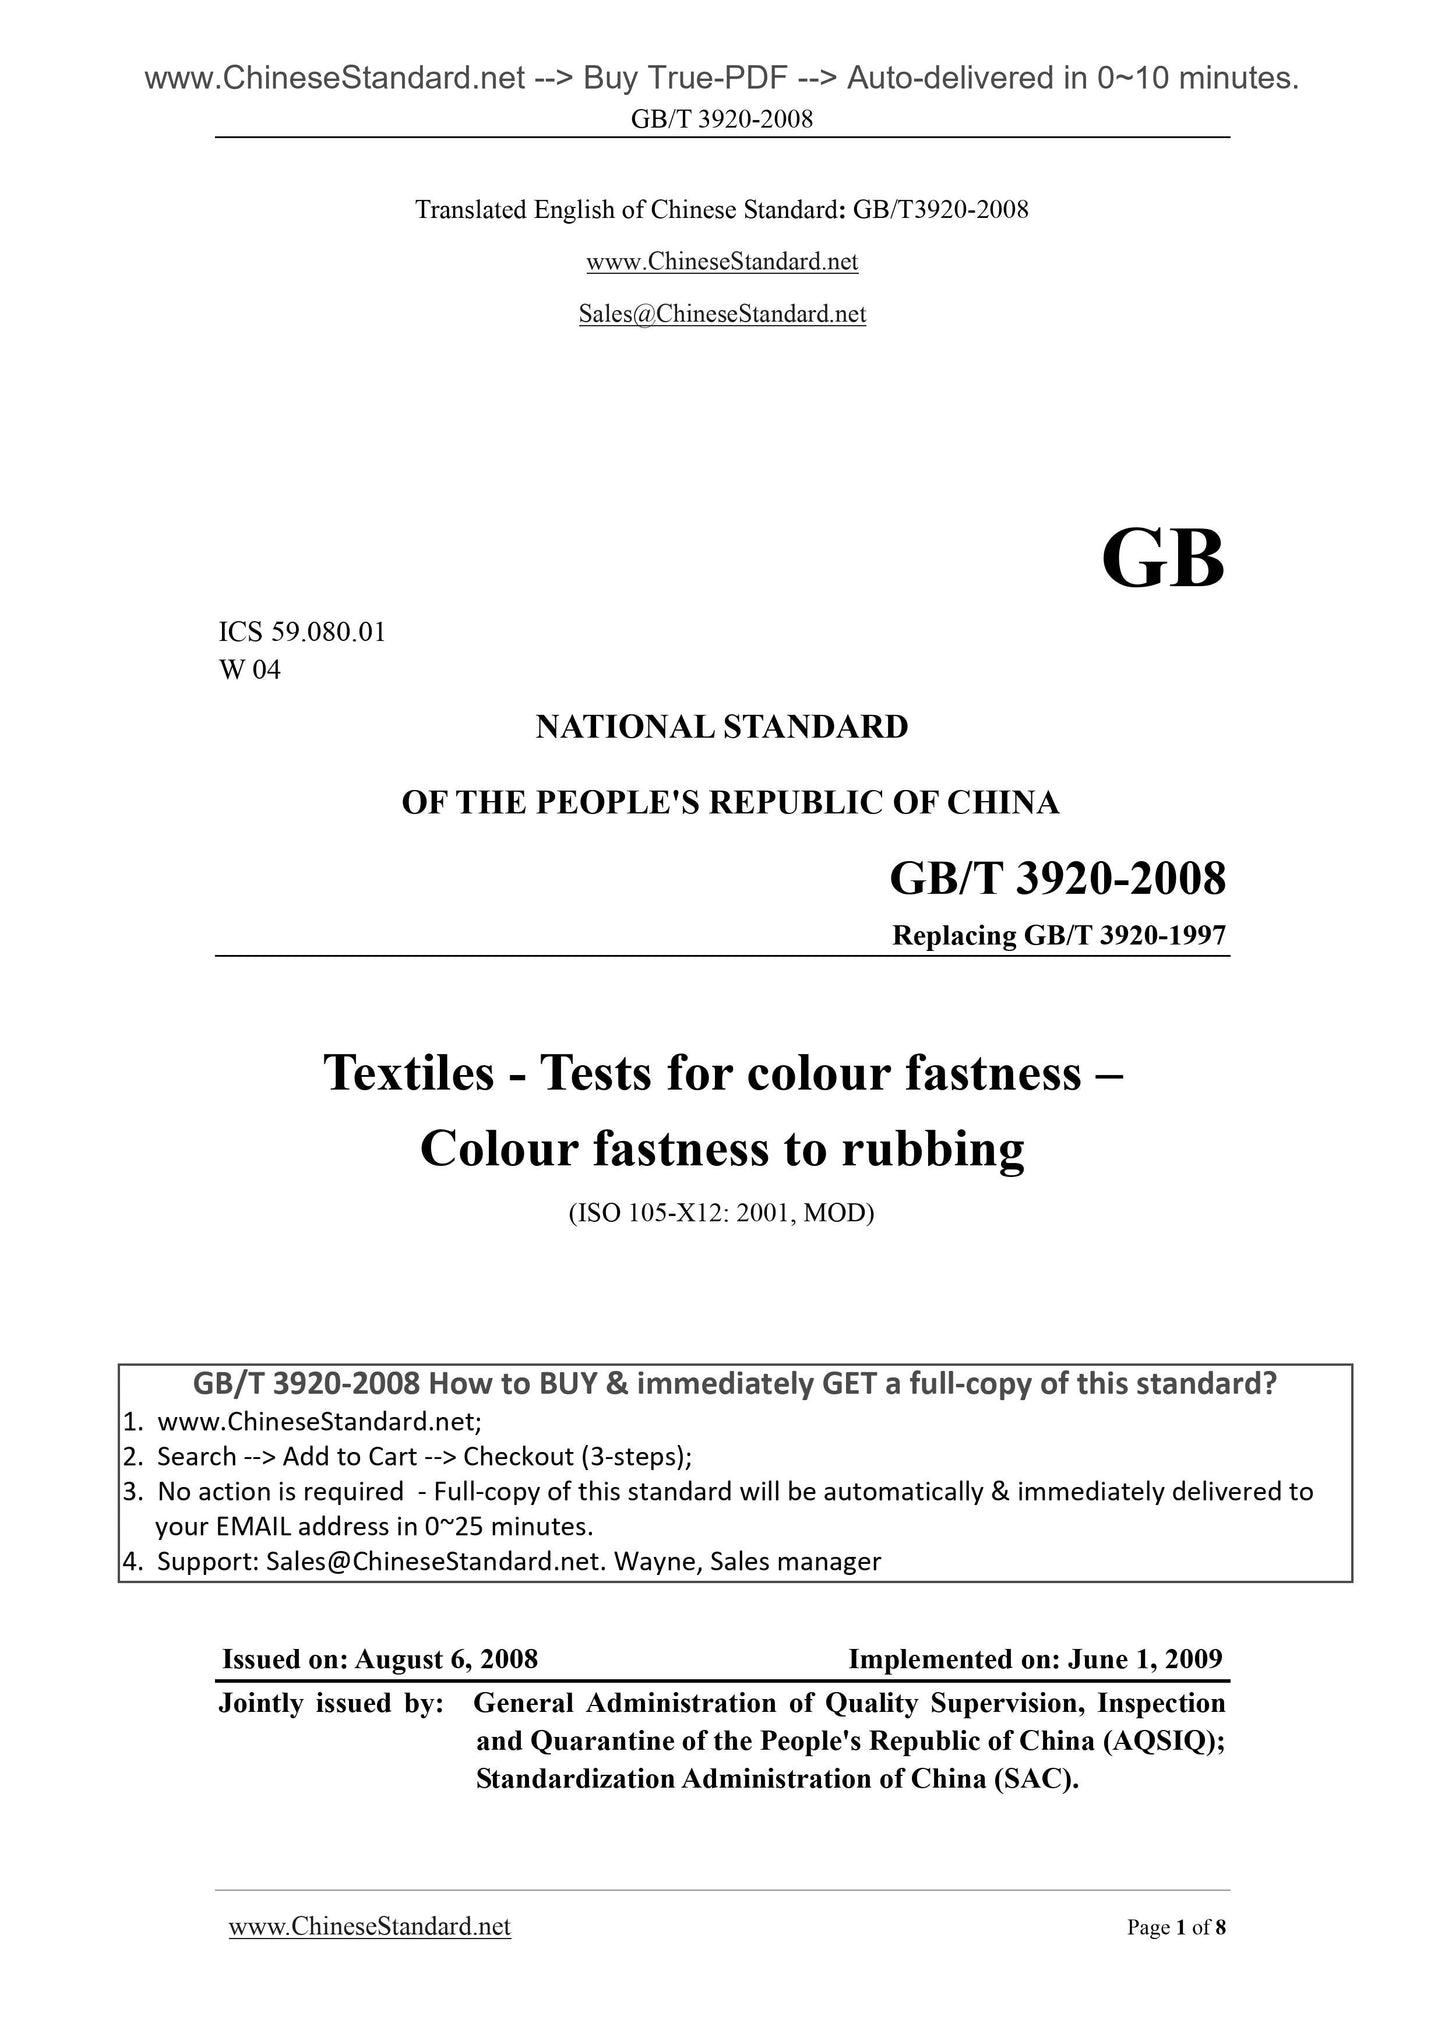 GB/T 3920-2008 Page 1